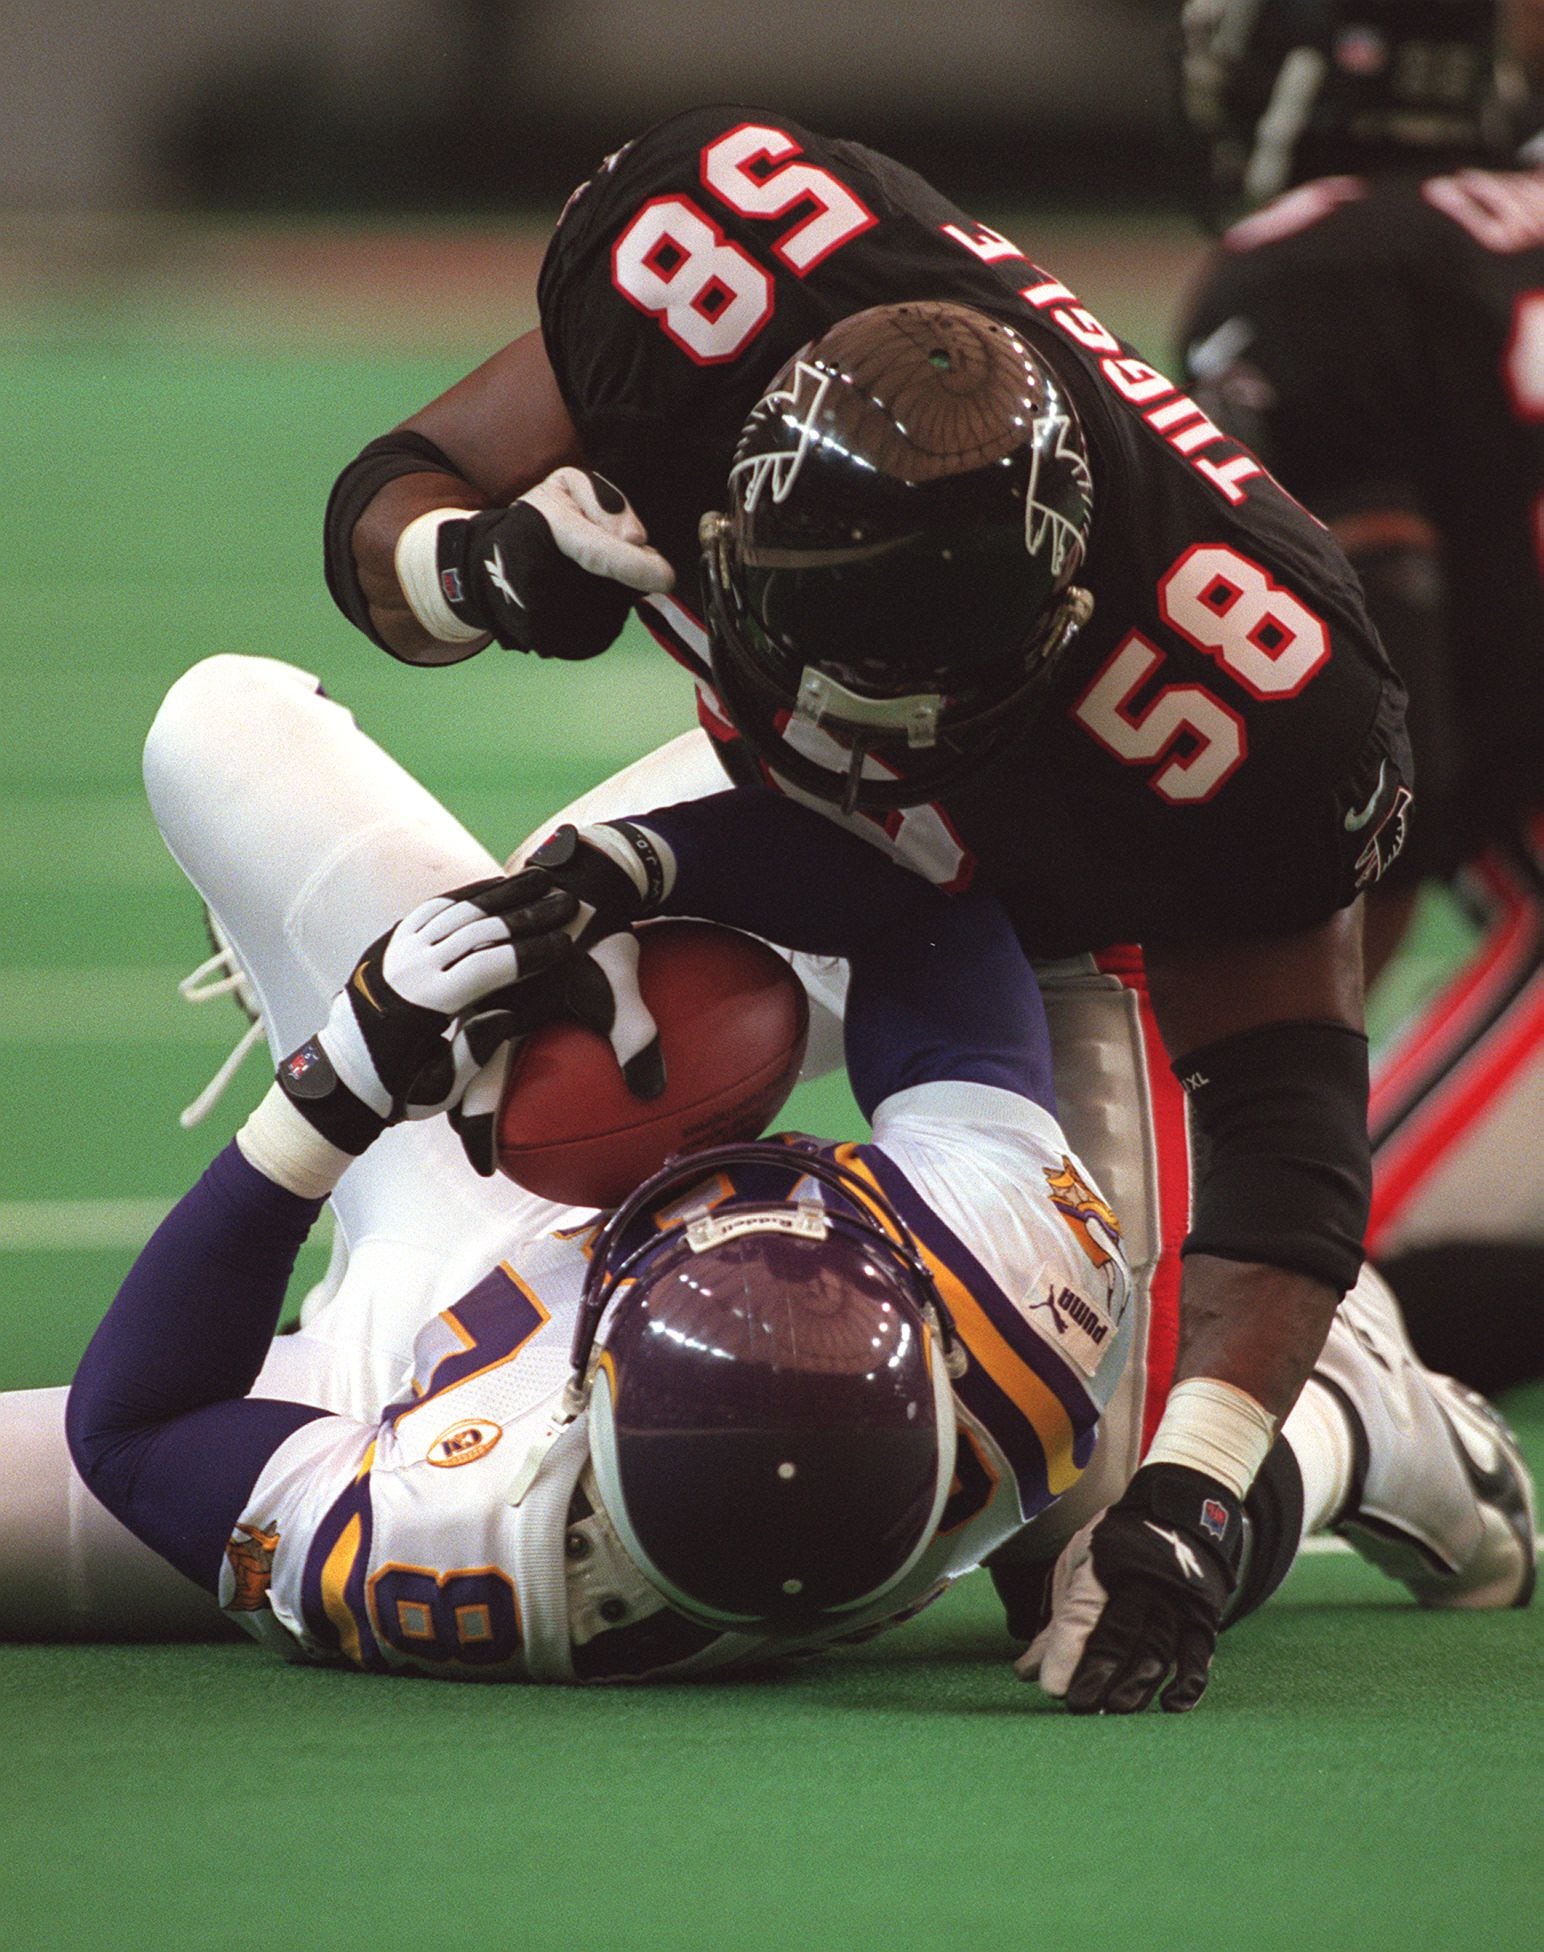 Looking back: Former Falcons star Jessie Tuggle